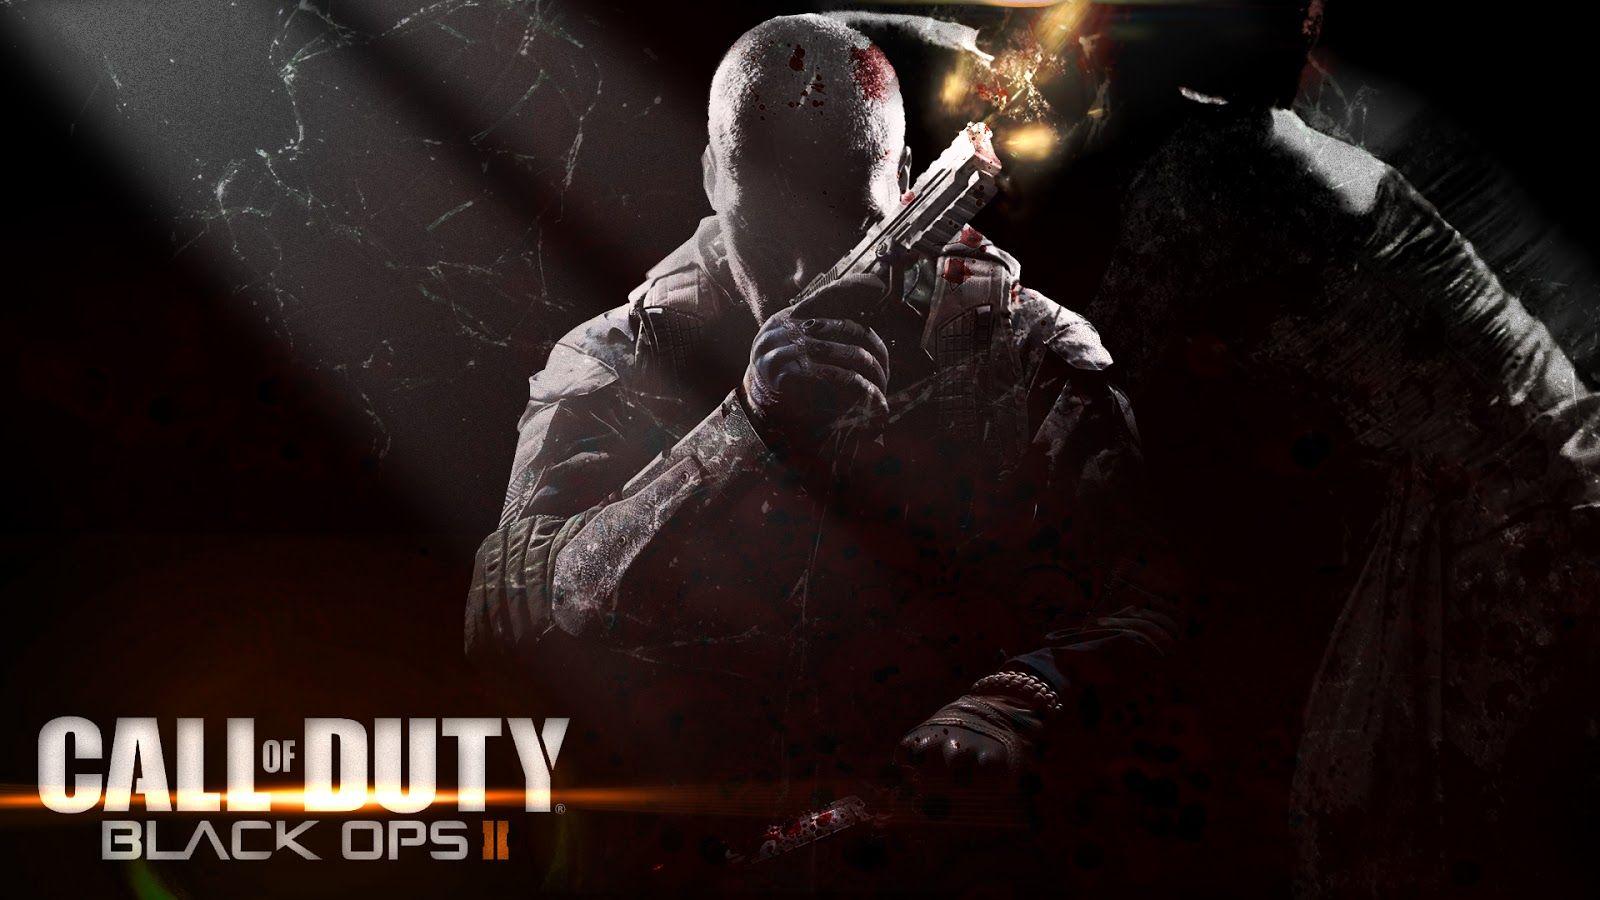 Call of Duty Black Ops 2 Zombies. Wallpaper Speed Art. Tiger